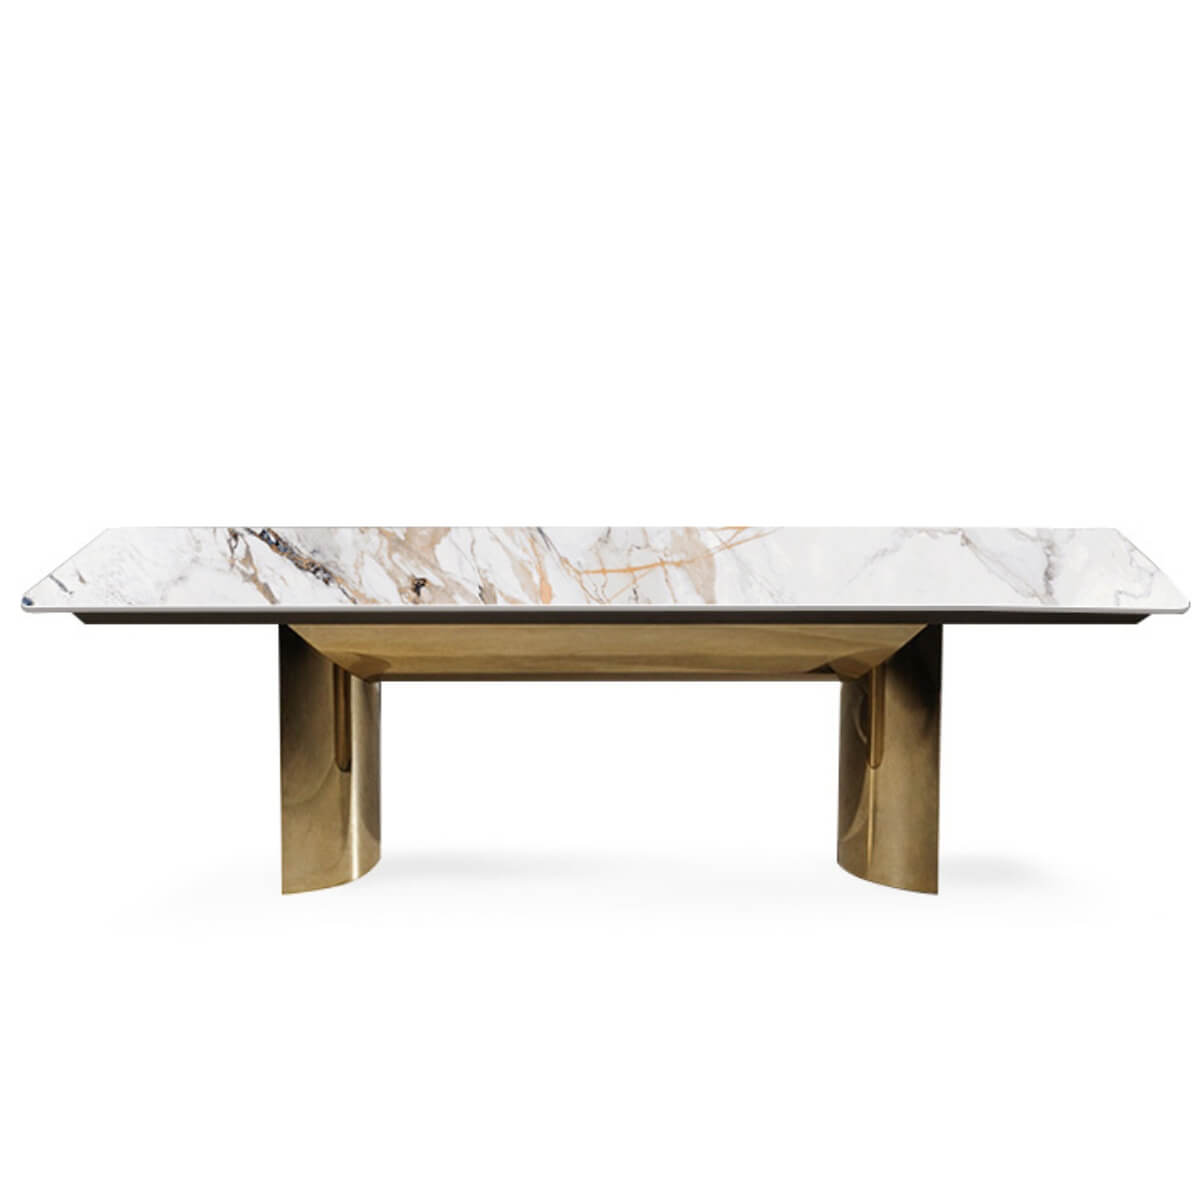 Morocco-Gold Dining Table